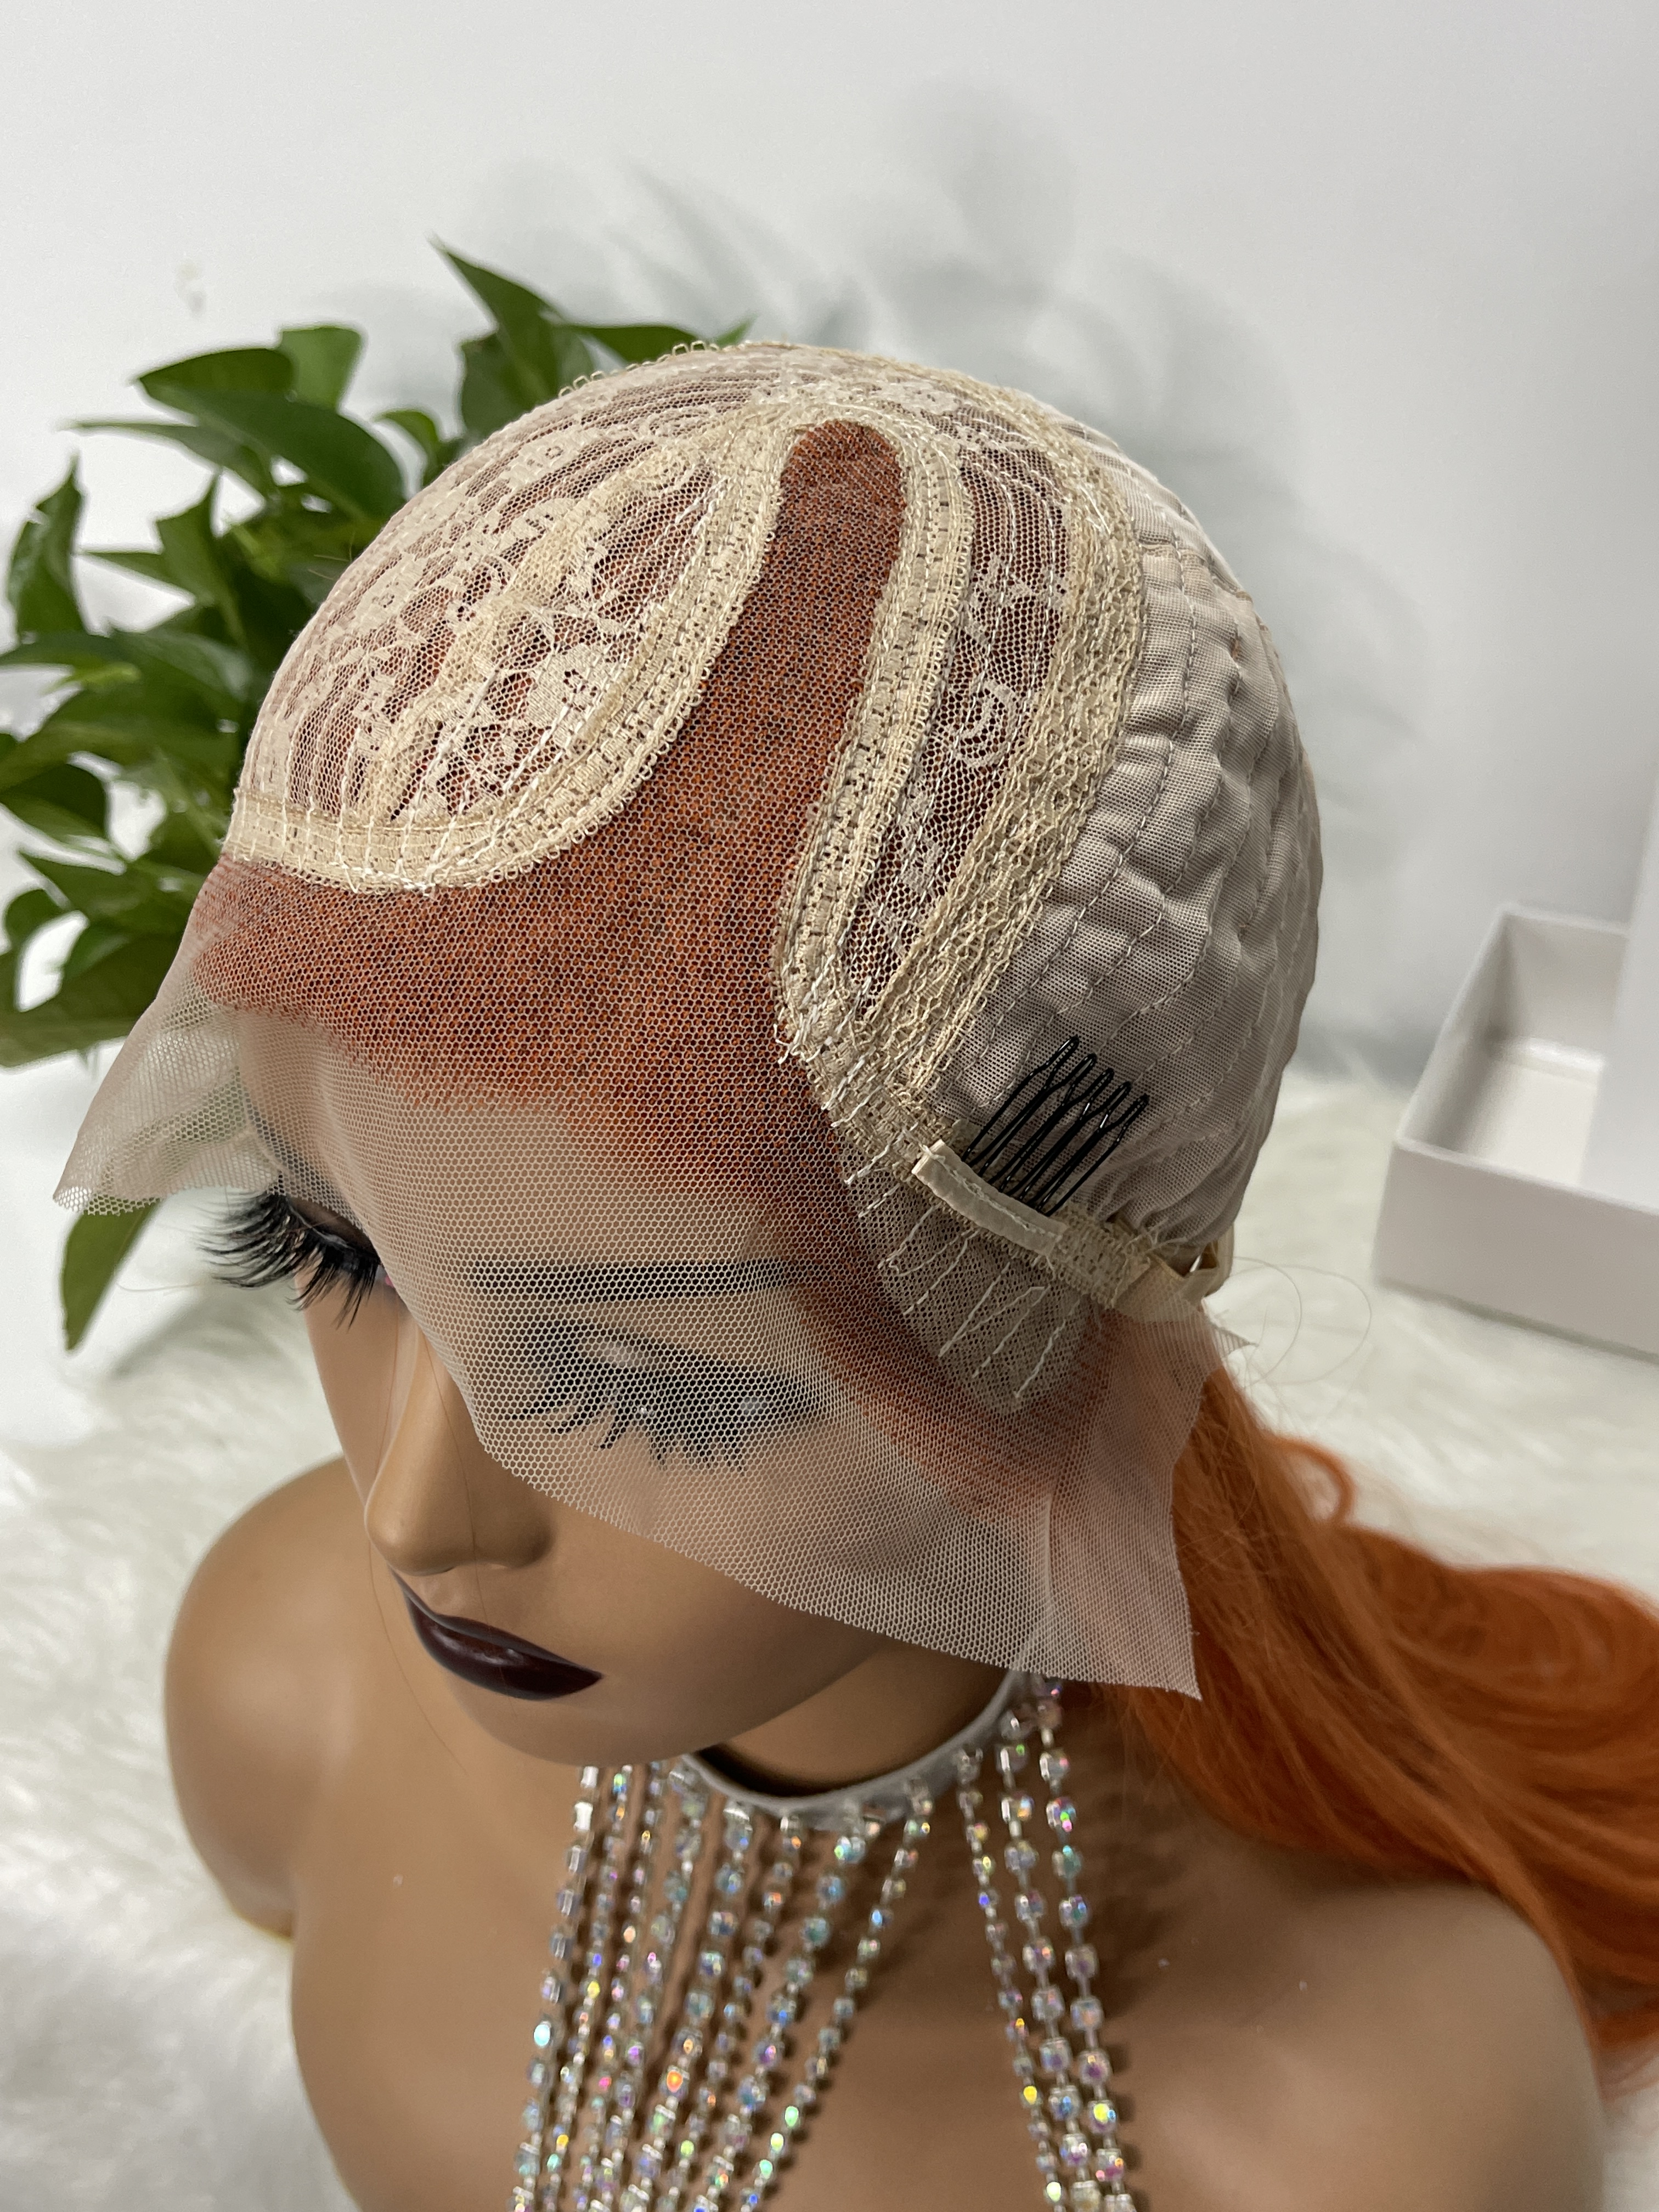 Angelbella 2022 New Cheap Ginger Orange 13X1X4 Lace Front Wigs Human Hair 